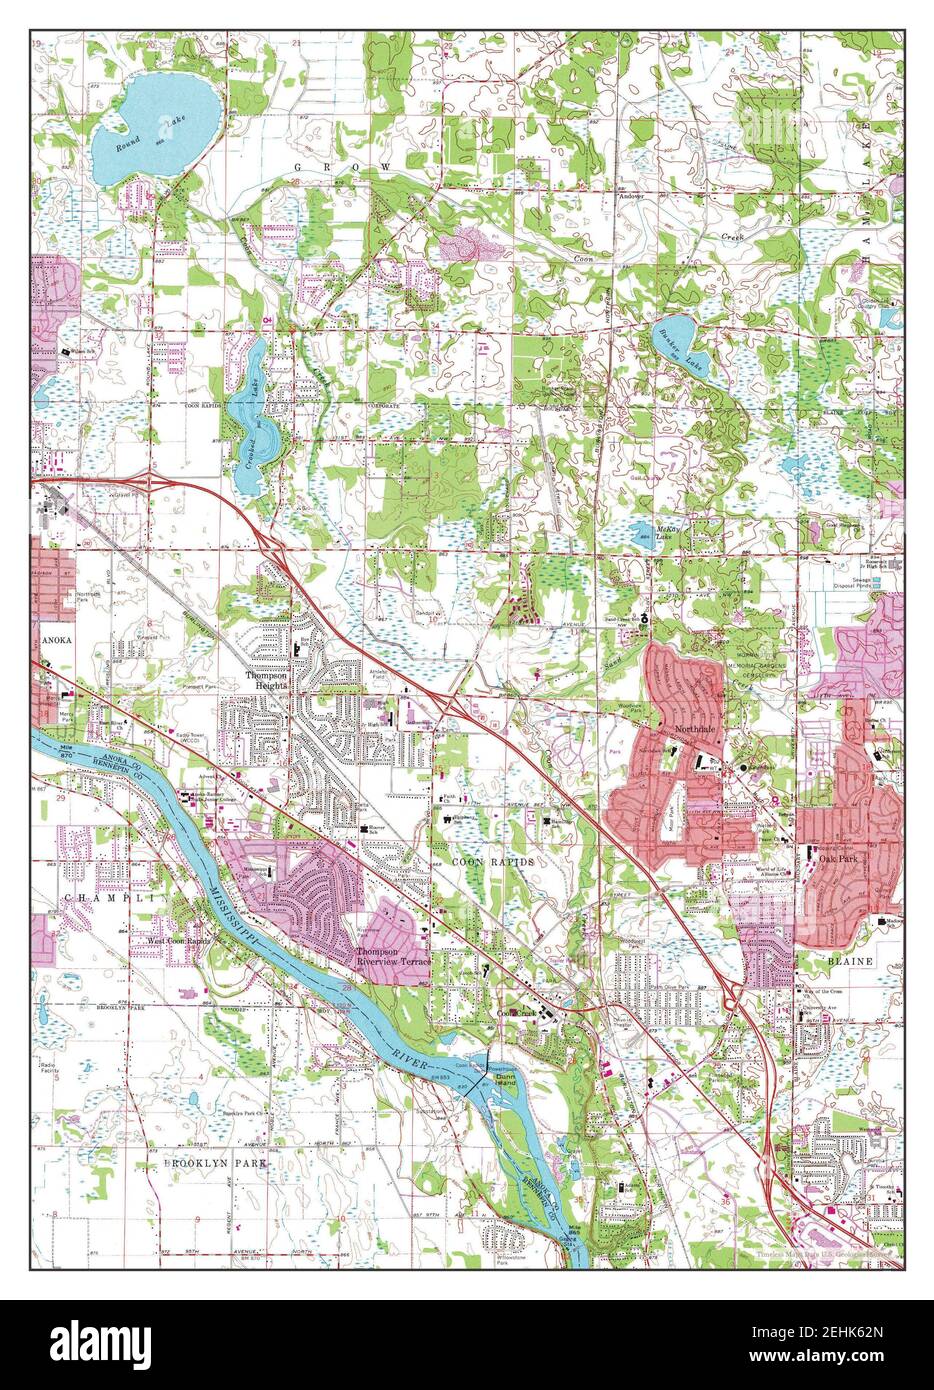 Coon Rapids, Minnesota, map 1967, 1:24000, United States of America by Timeless Maps, data U.S. Geological Survey Stock Photo